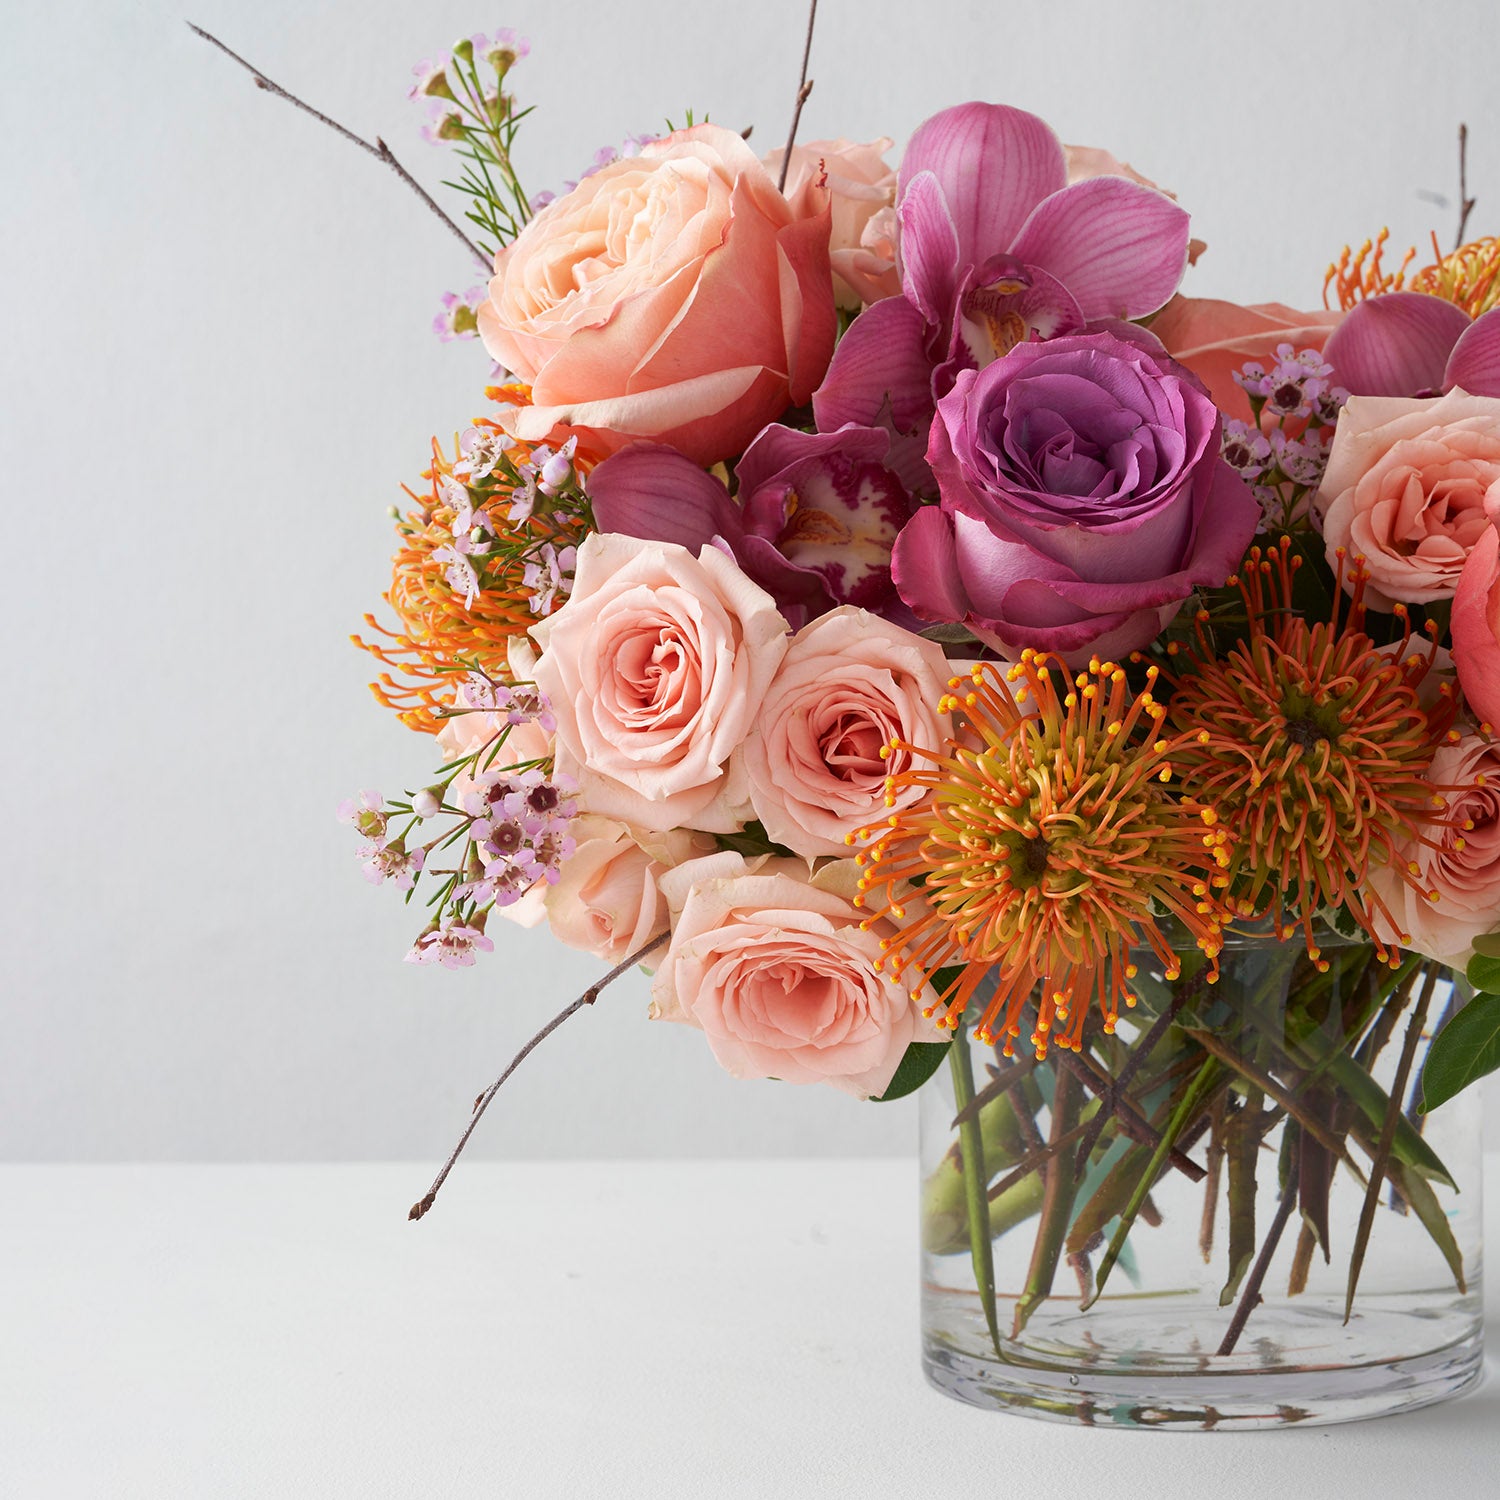 Roses, protea and cymbidium orchids arranged in clear glass vase off center of white background.